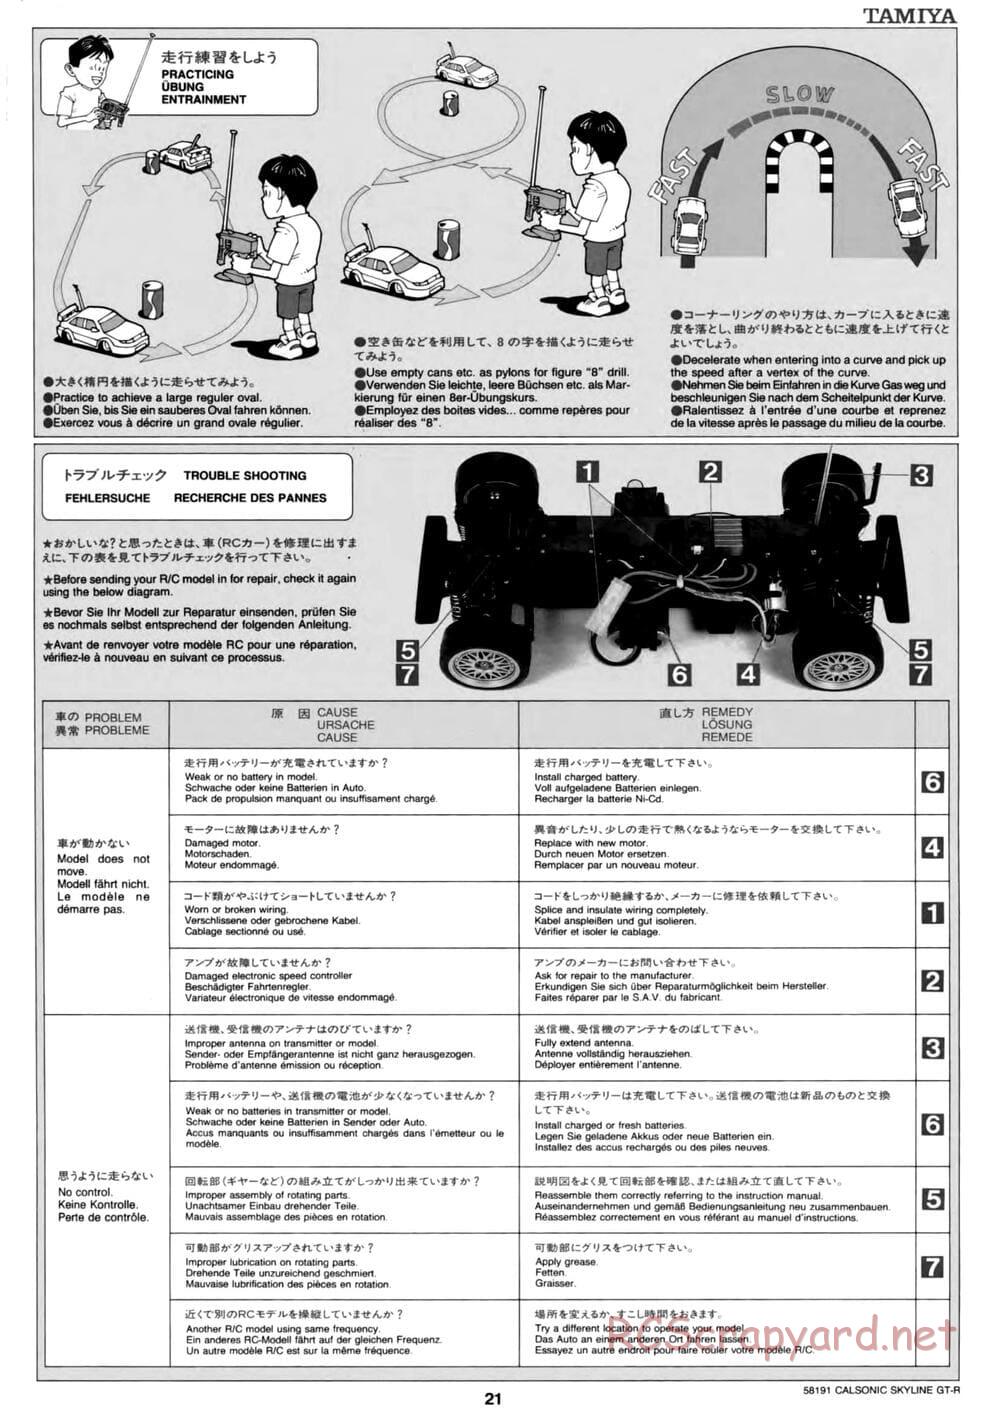 Tamiya - Calsonic Skyline GT-R - TL-01 Chassis - Manual - Page 21